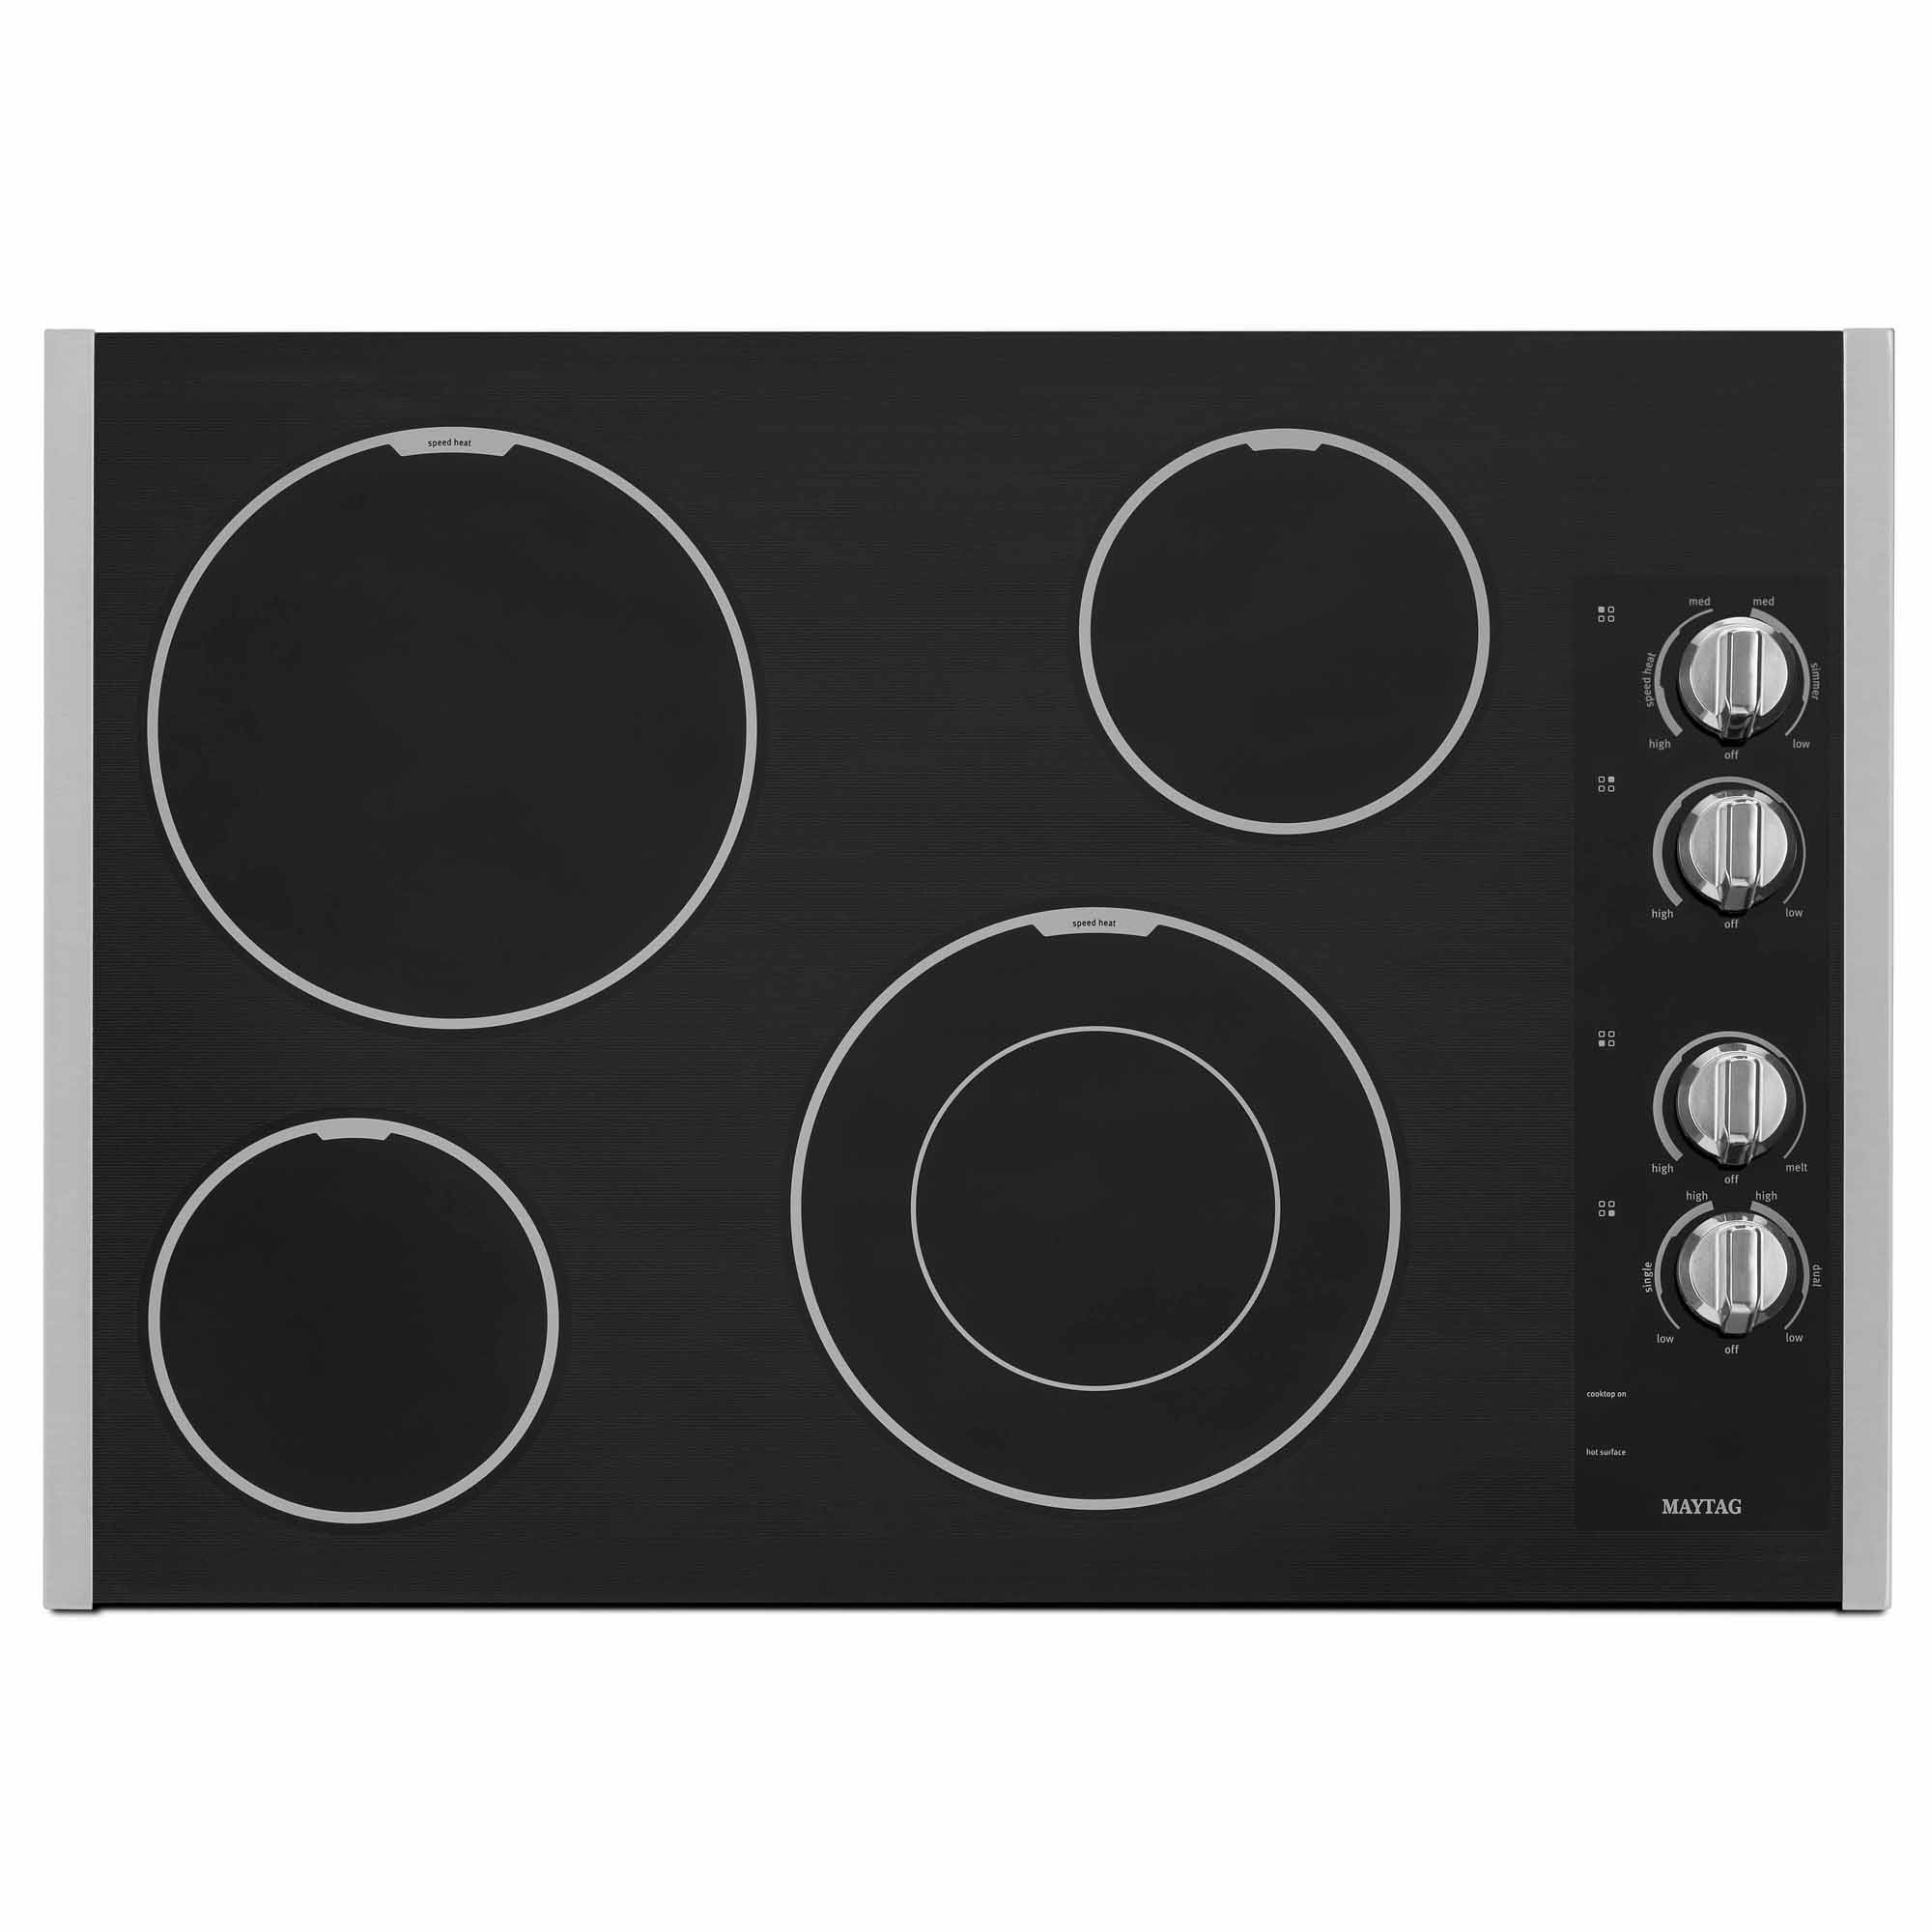 Maytag 30 Electric Glass Cooktop w\/ Dual-Choice Element - Stainless Steel - MEC7430BS